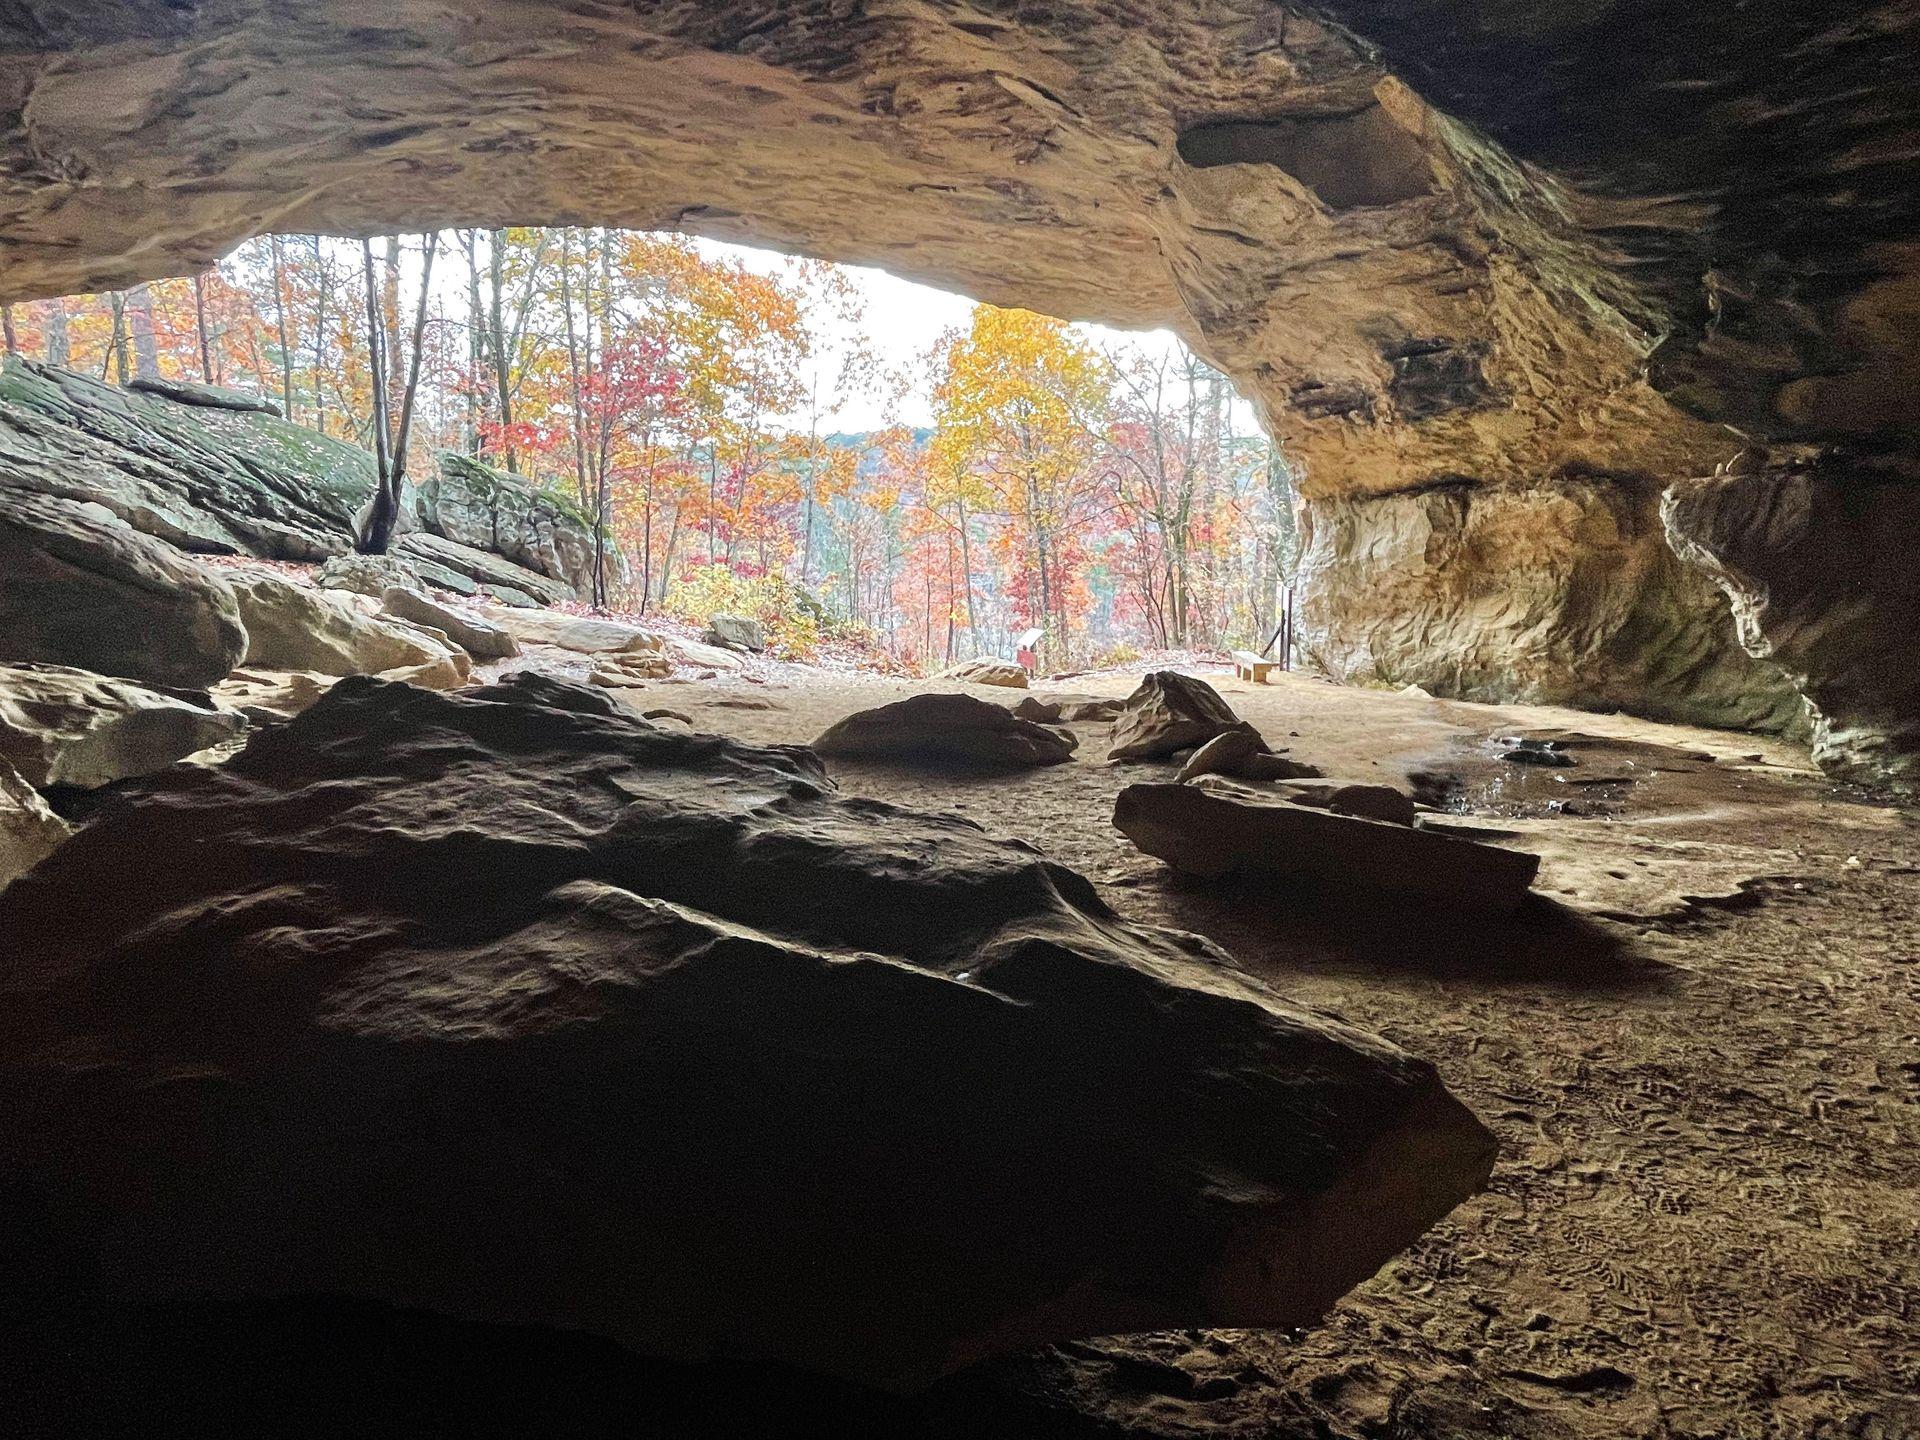 The inside of the Rock House. You can see colorful fall foliage outside of the cave.